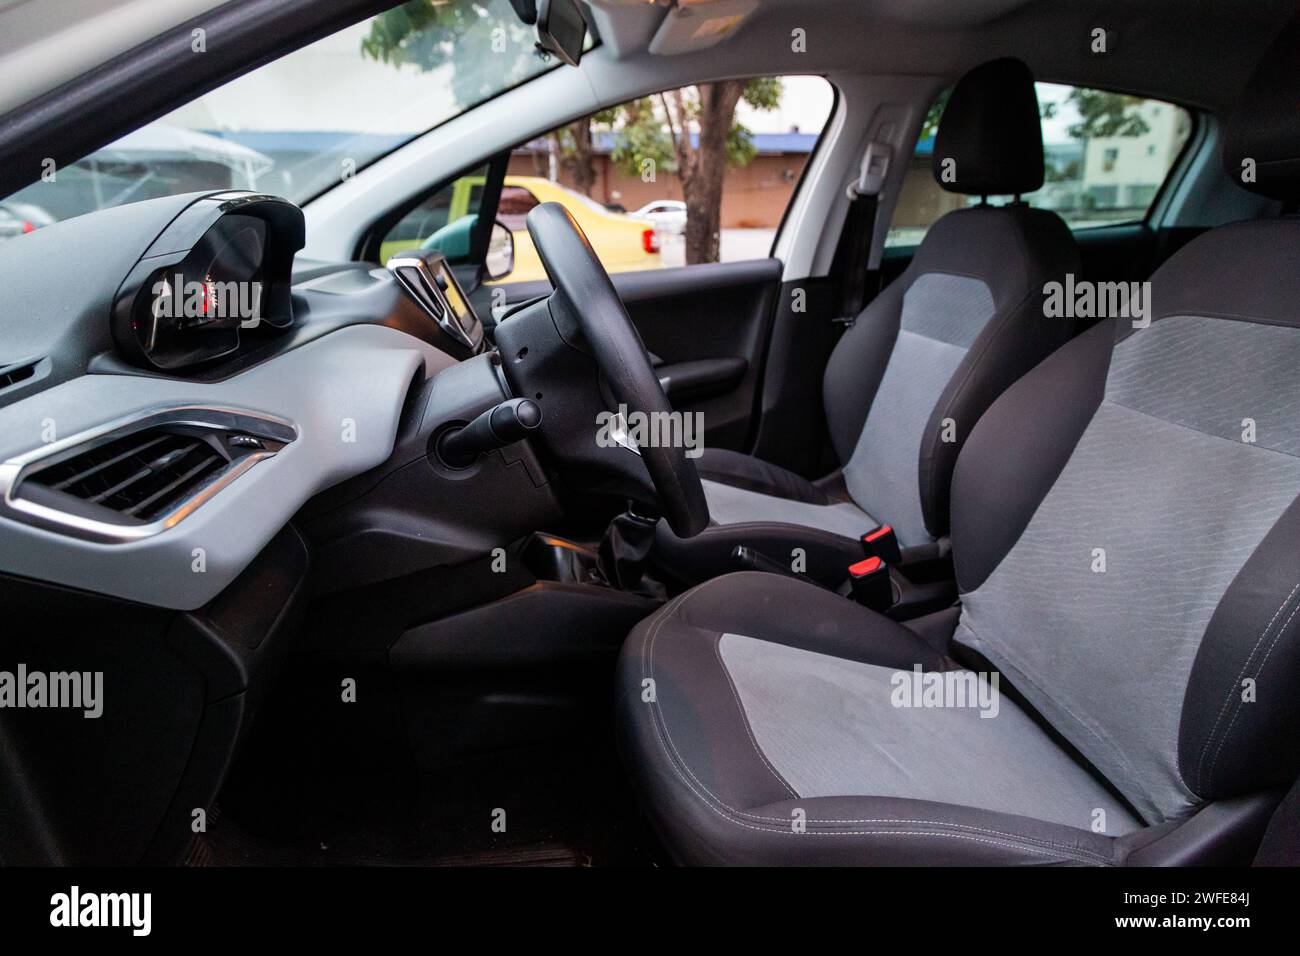 Black and gray leather interior of a car Stock Photo